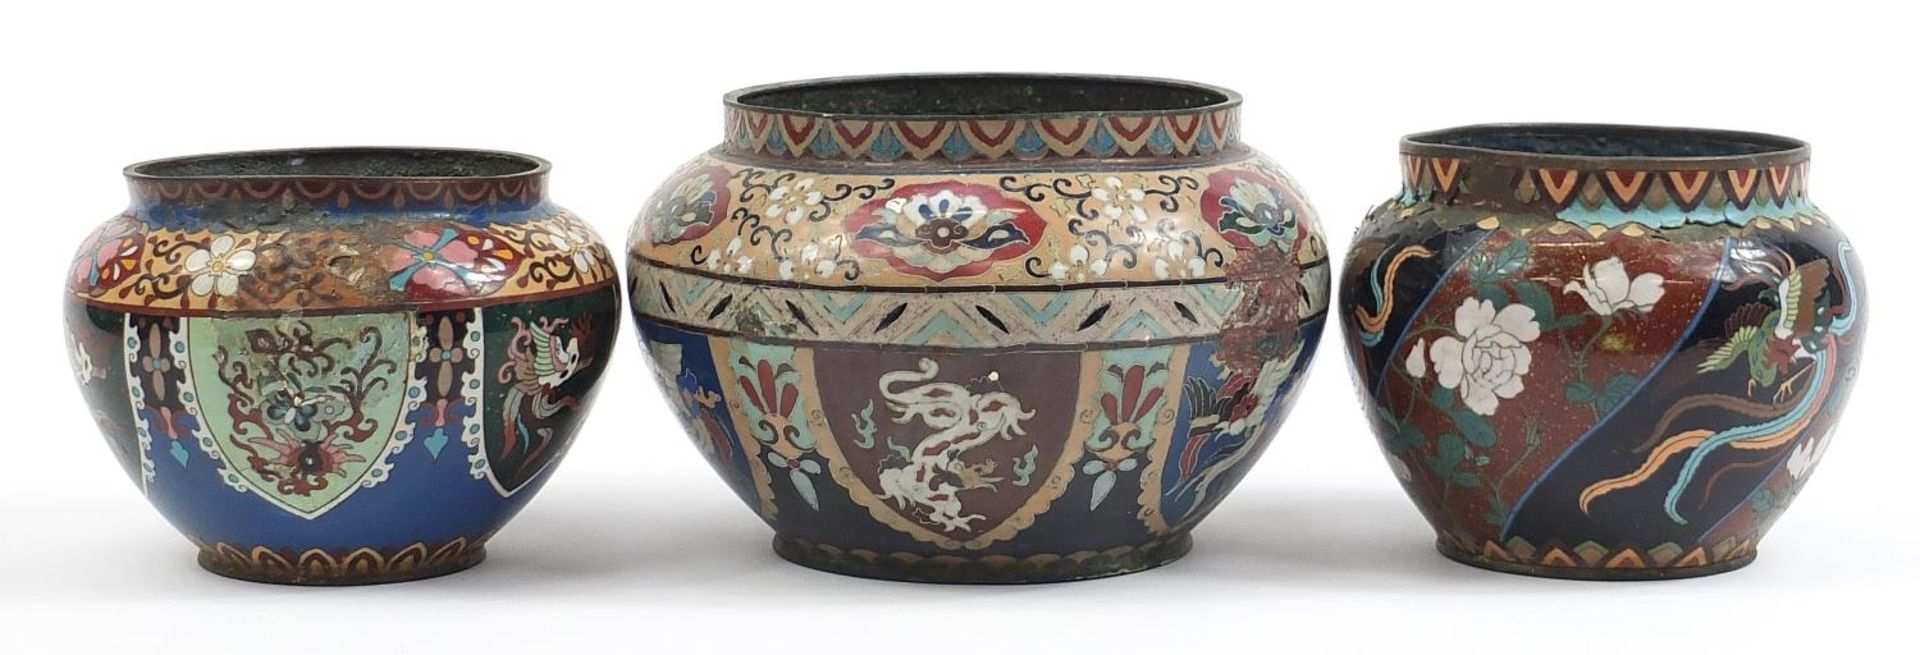 Three Japanese cloisonne jardinieres enamelled with dragons and flowers, the largest 24cm in - Image 2 of 4